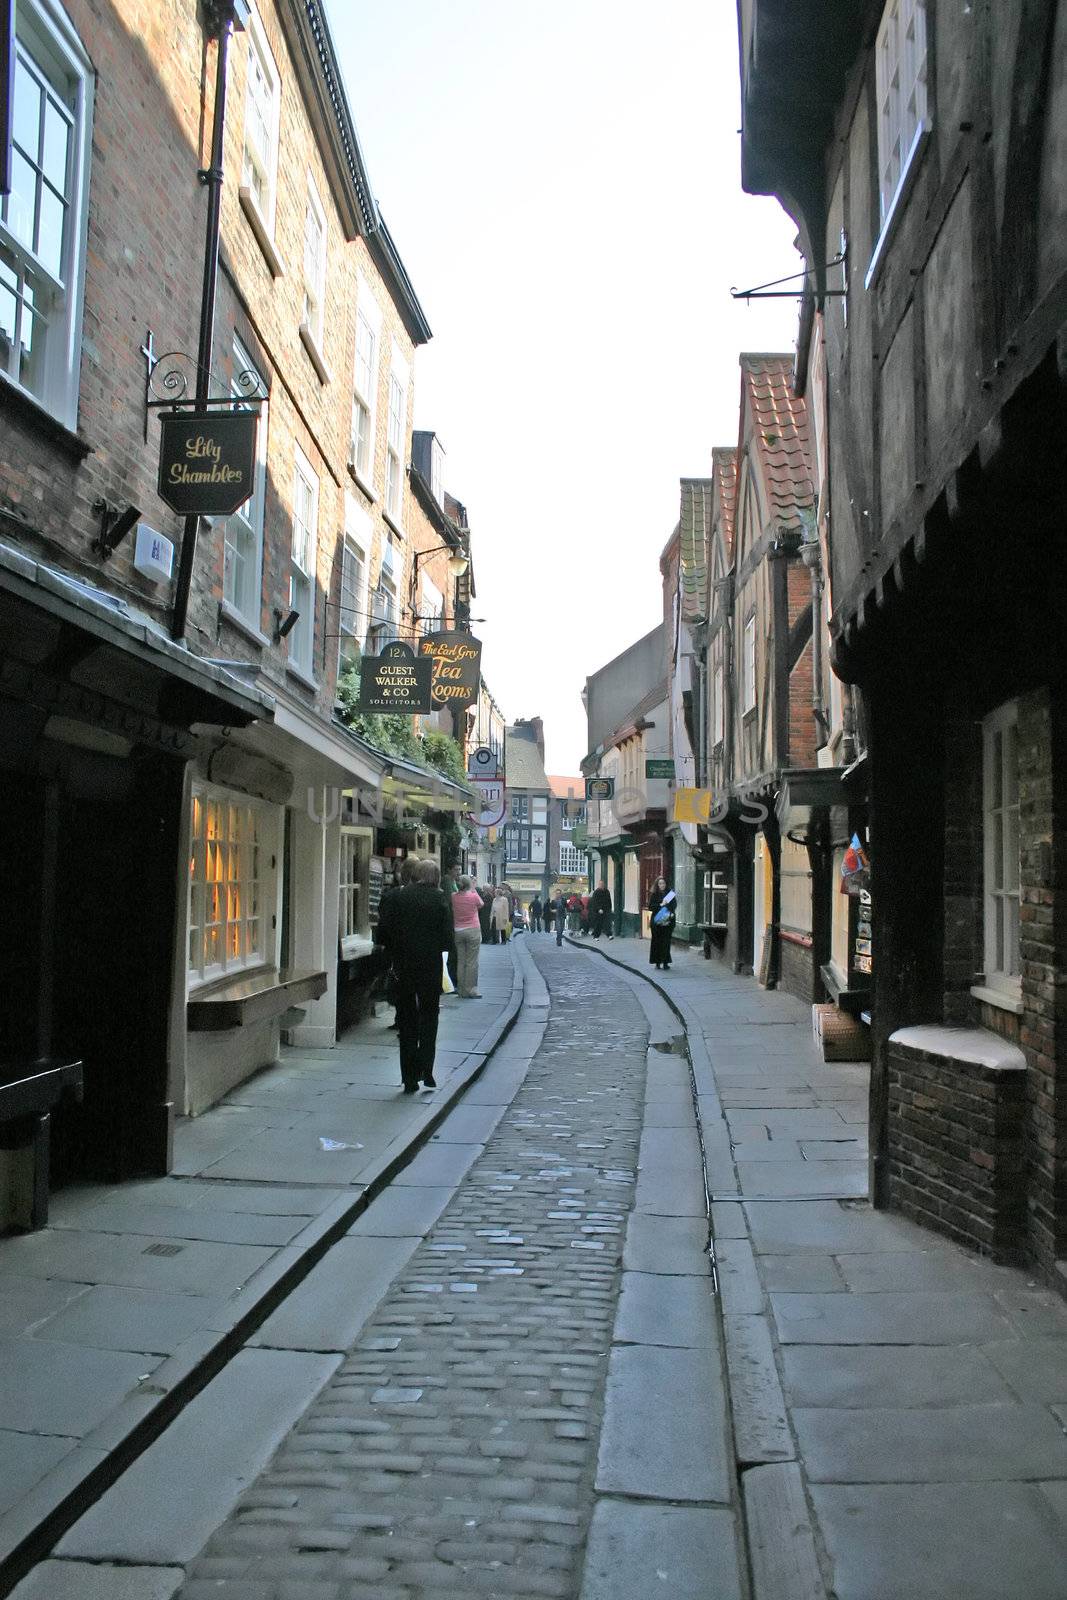 Tourists in The Shambles York